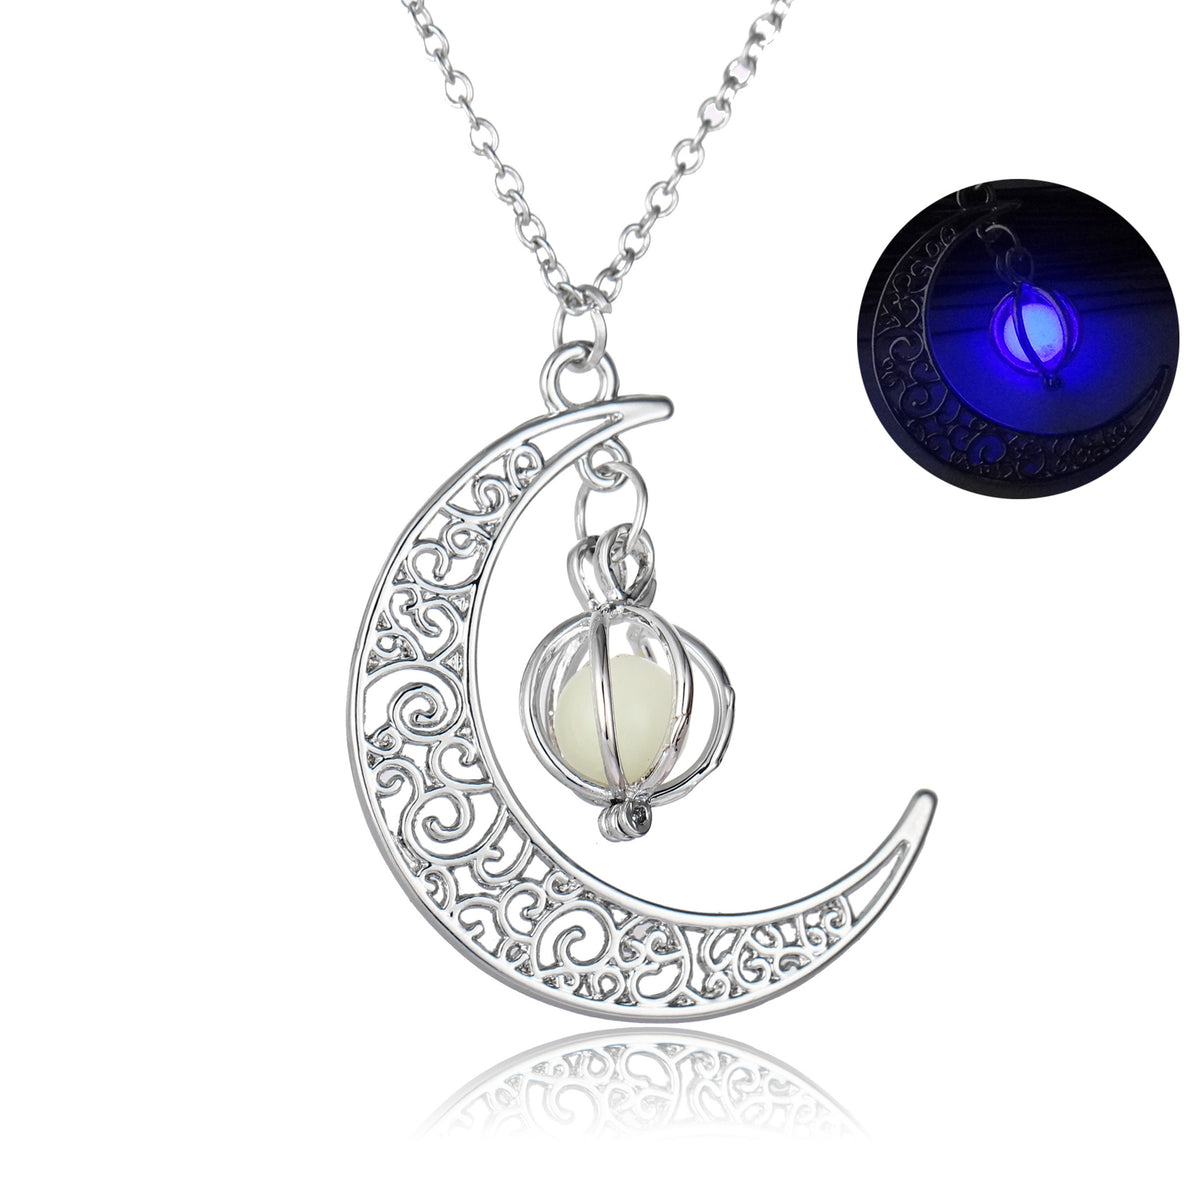 Searoomlynn Crescent Moon Necklaceネックレス - ネックレス